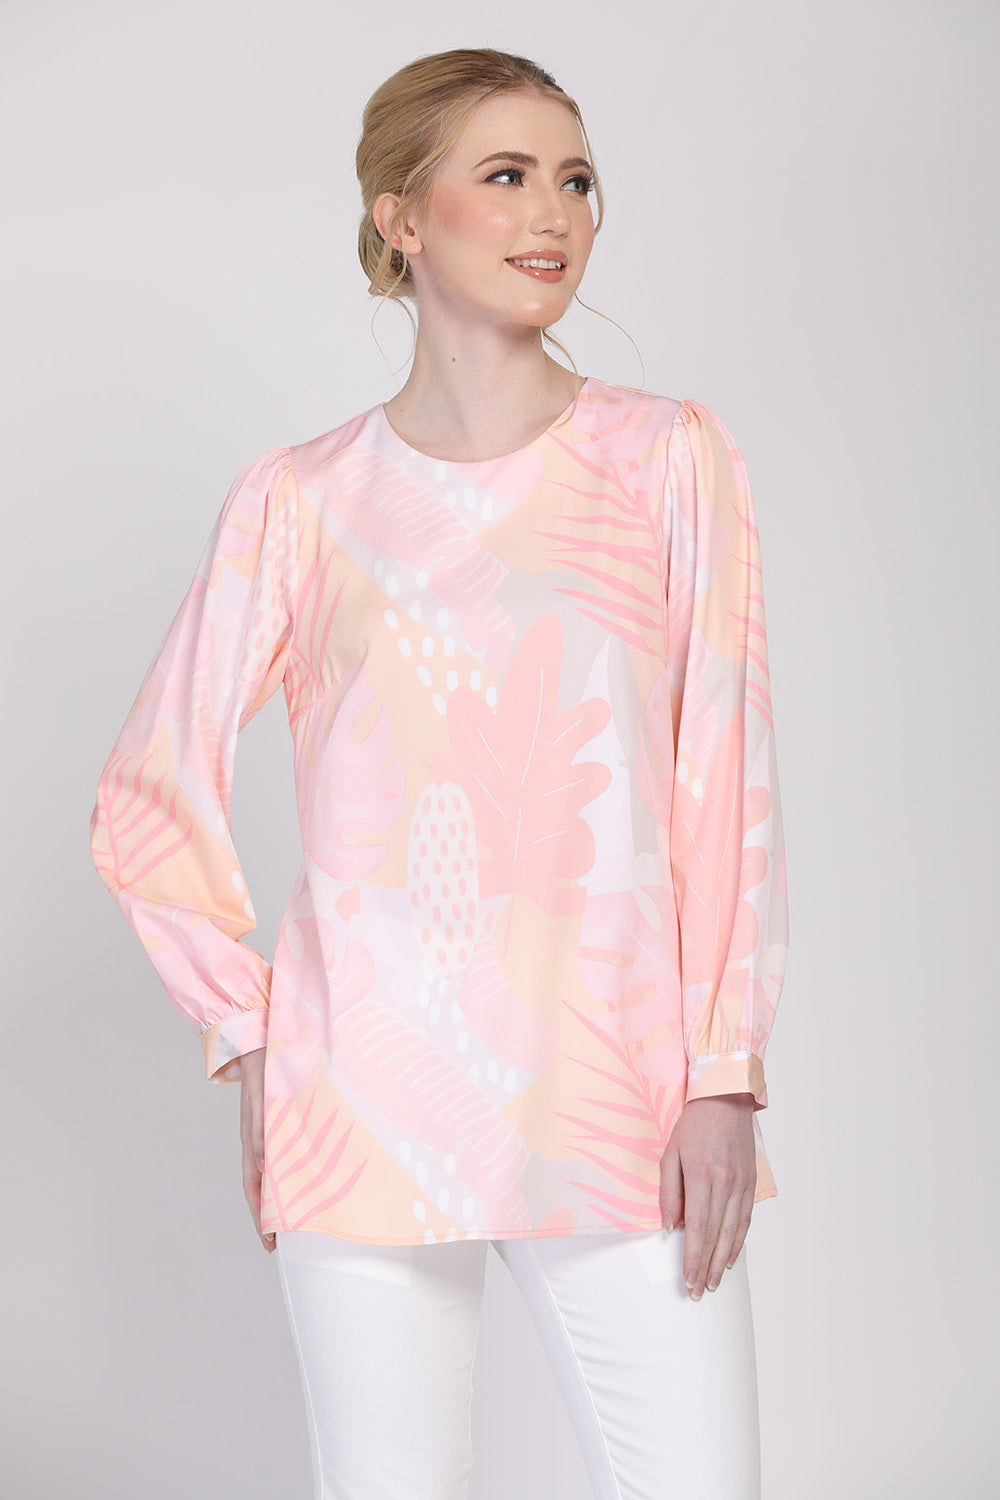 The Seni Blouse in Pink